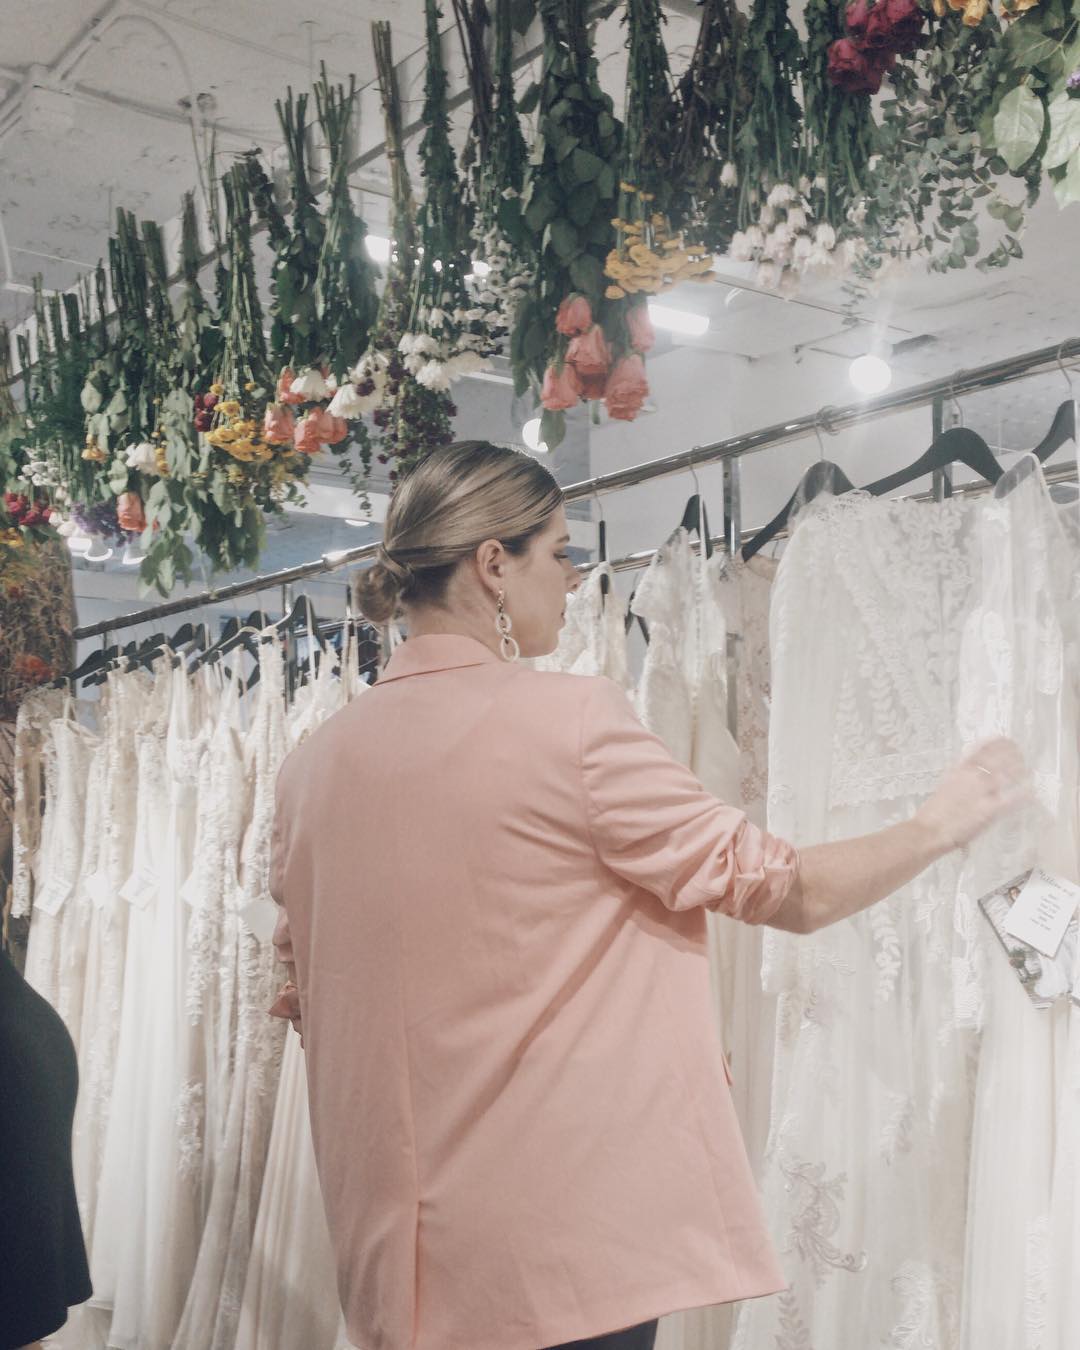 Blonde woman browsing through wedding dresses at Laced With Grace Bridal